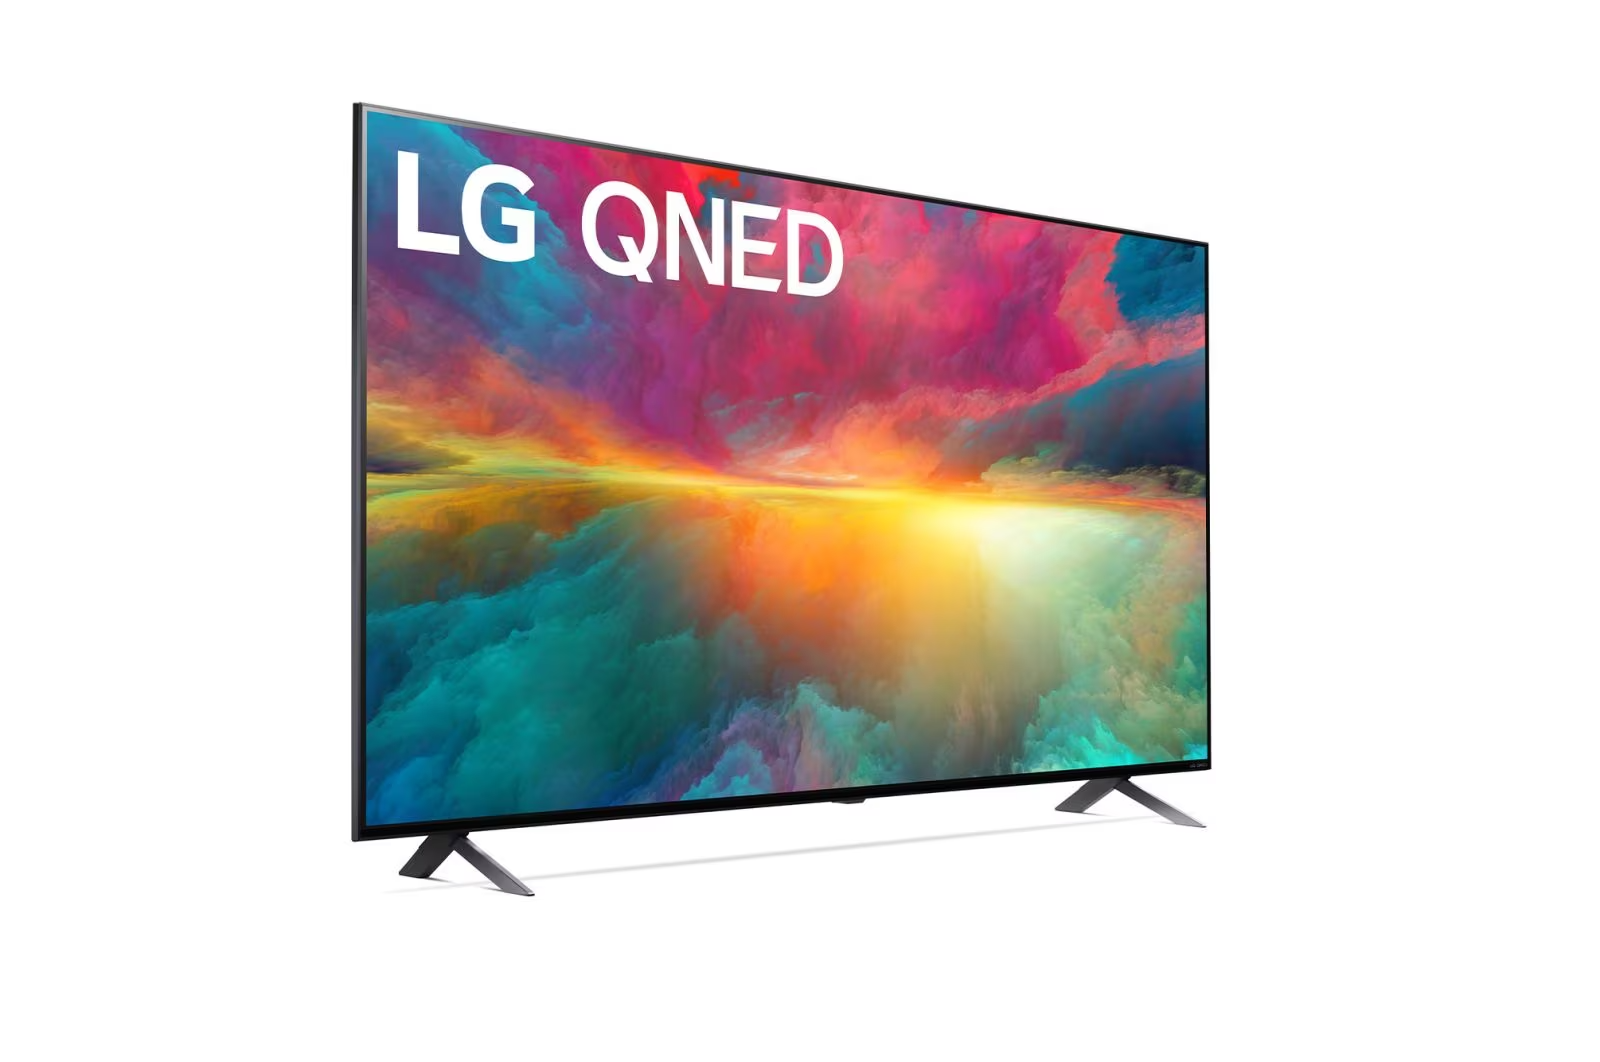 QNED 50 LG. LG 55qned75. LG 65qned876ra. 43qned756ra. Lg телевизоры 65 qned